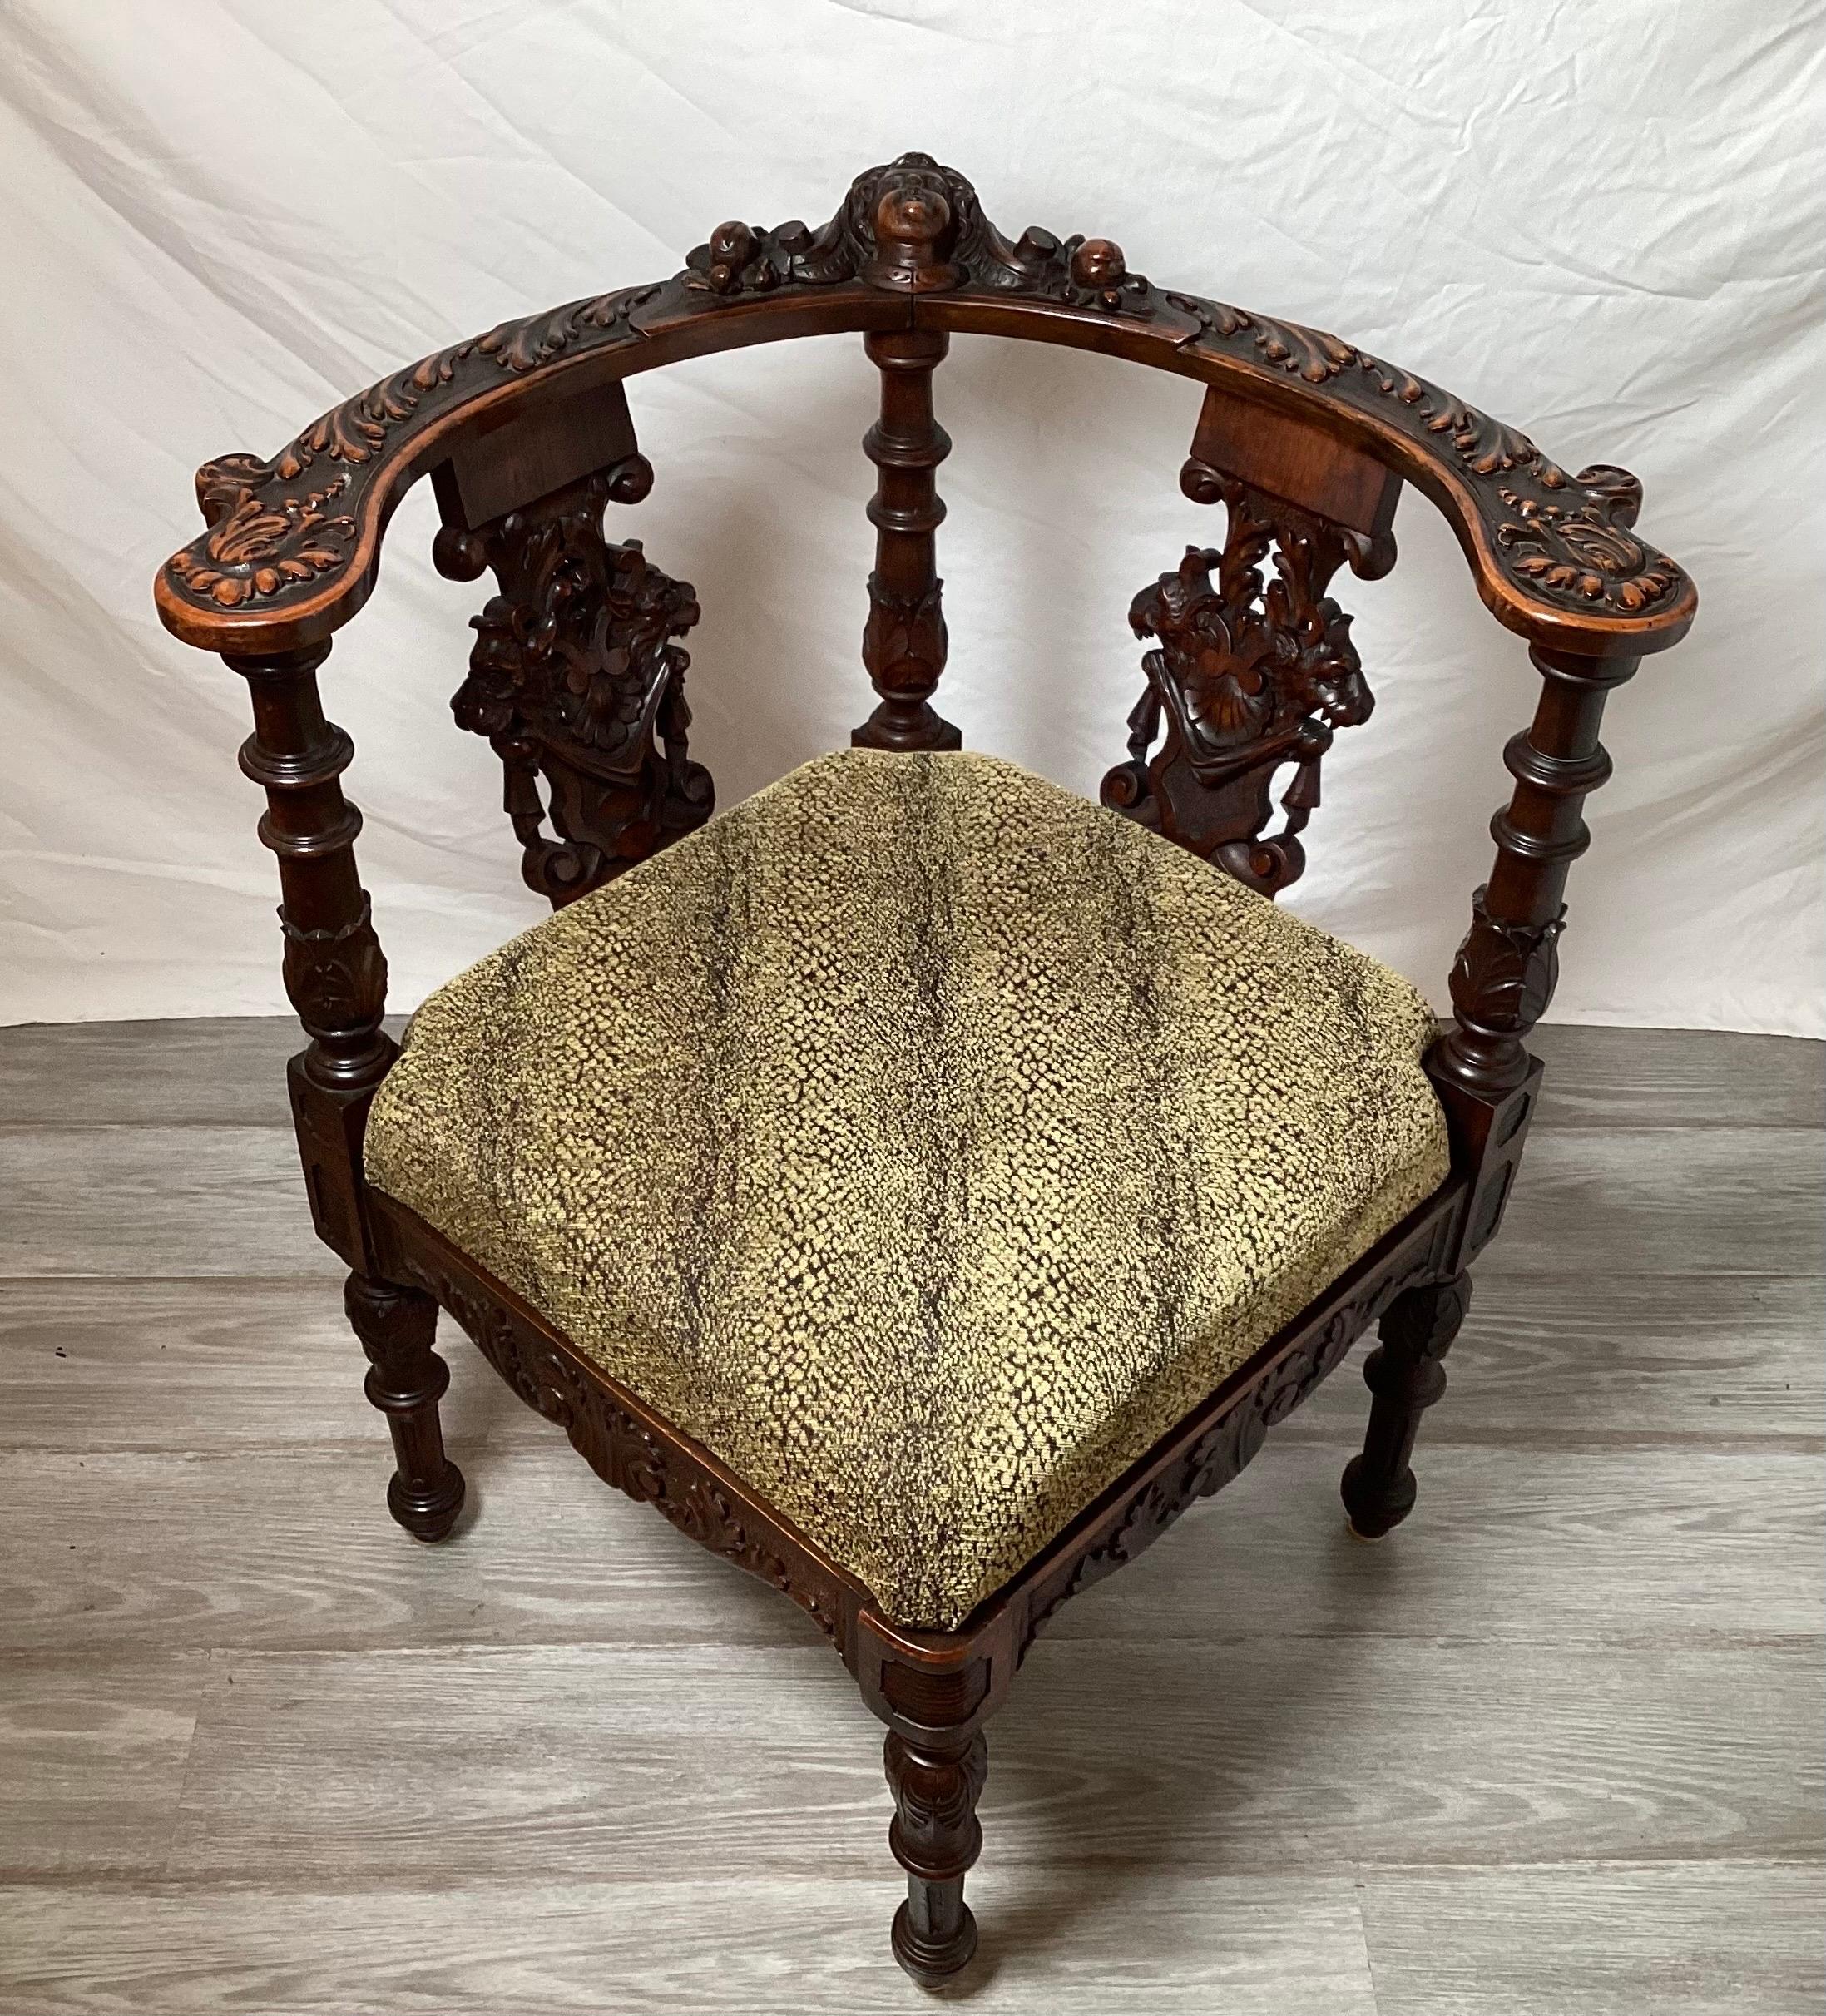 An ornately hand carved walnut corner chair, circa 1880's  The horseshoe back with carving with heavily carved splats with four turned and carved legs, the seat in an unexpected snakeskin fabric. 